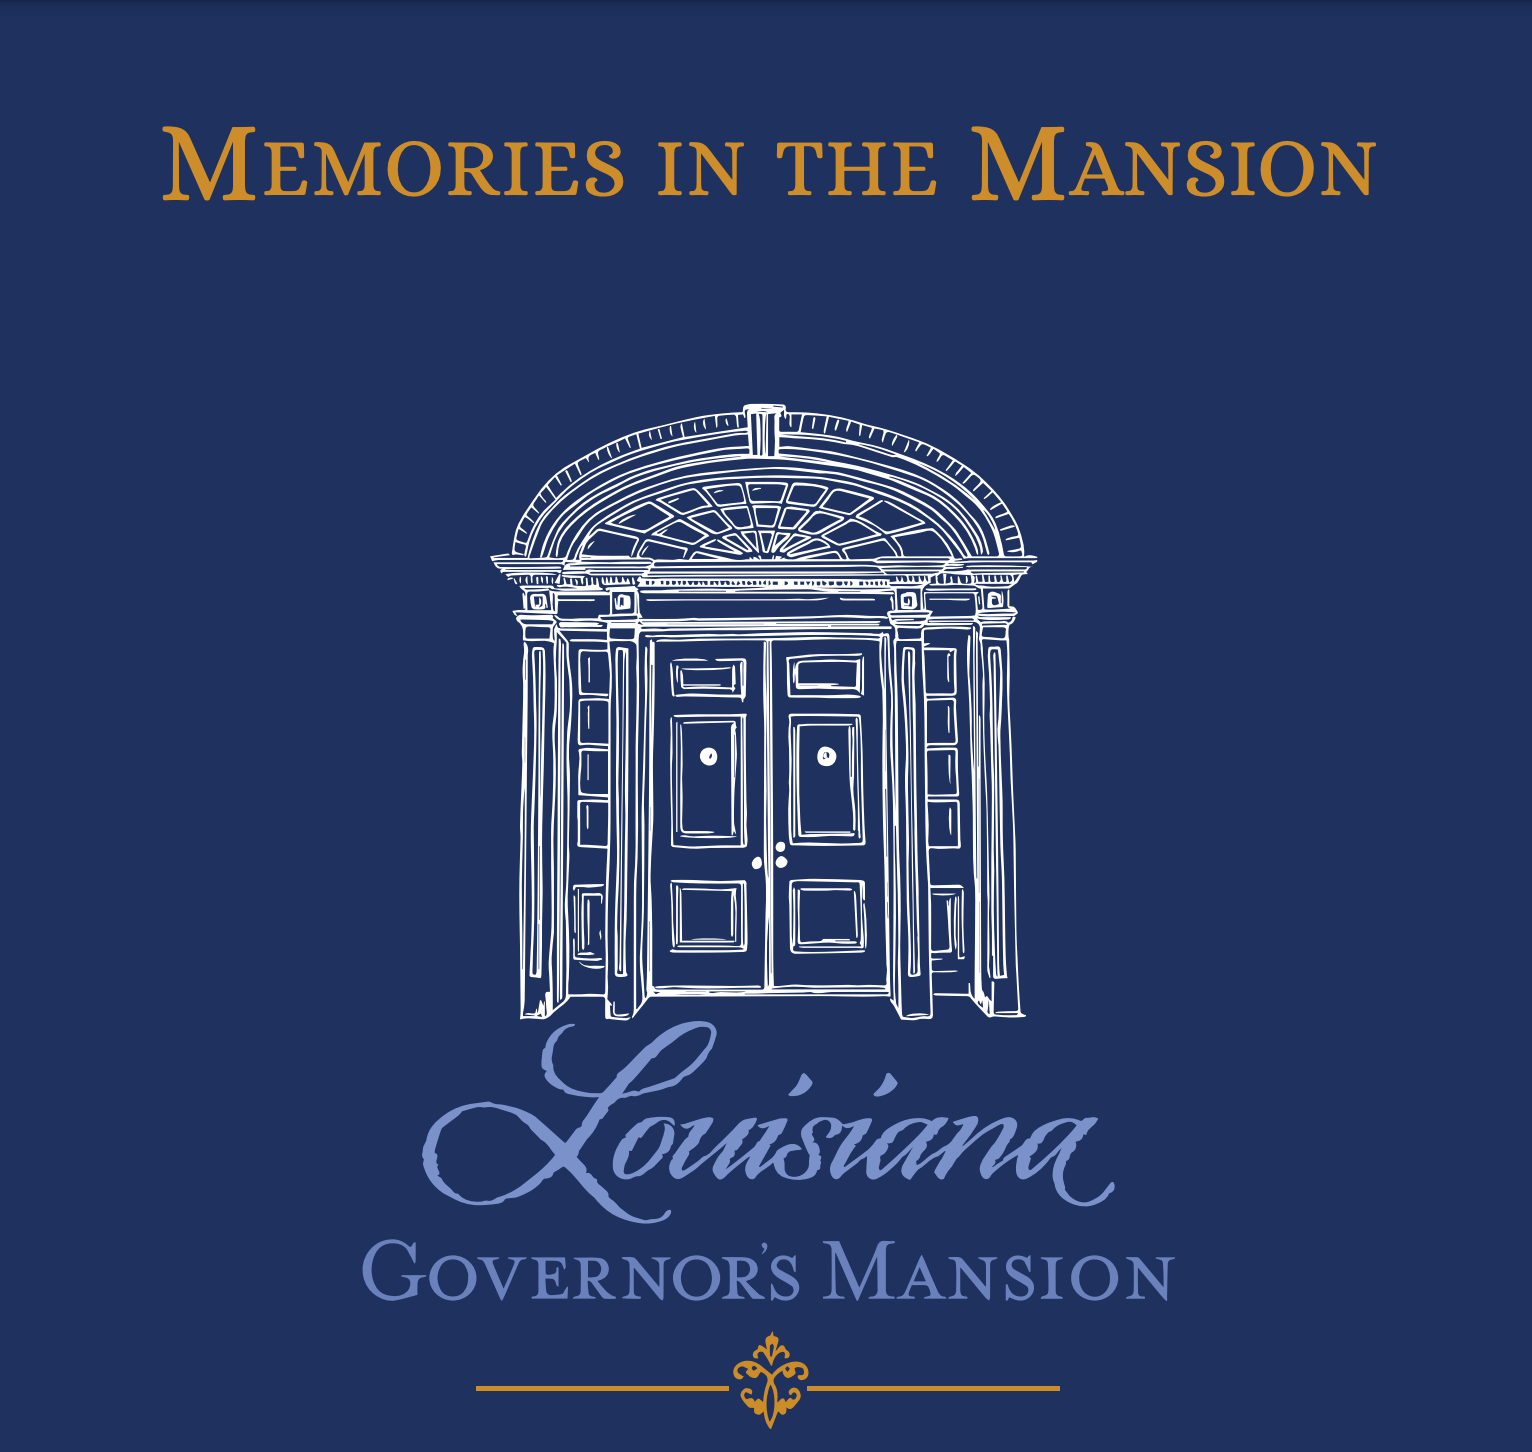 Limited edition "Memories in the Mansion" pre-sale